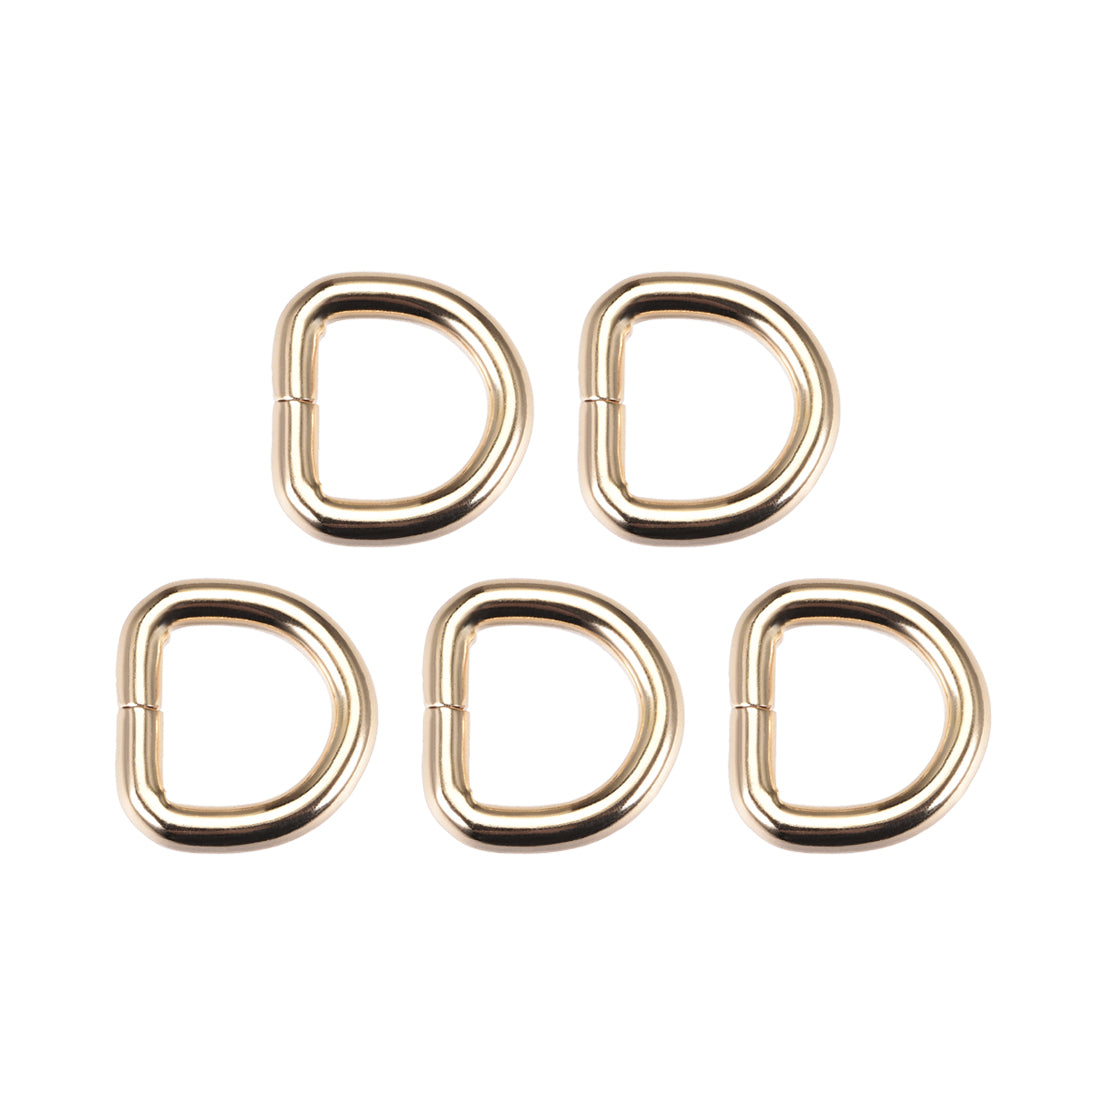 uxcell Uxcell 5 Pcs D Ring Buckle 0.63 Inch Metal Semi-Circular D-Rings Gold Tone for Hardware Bags Belts Craft DIY Accessories